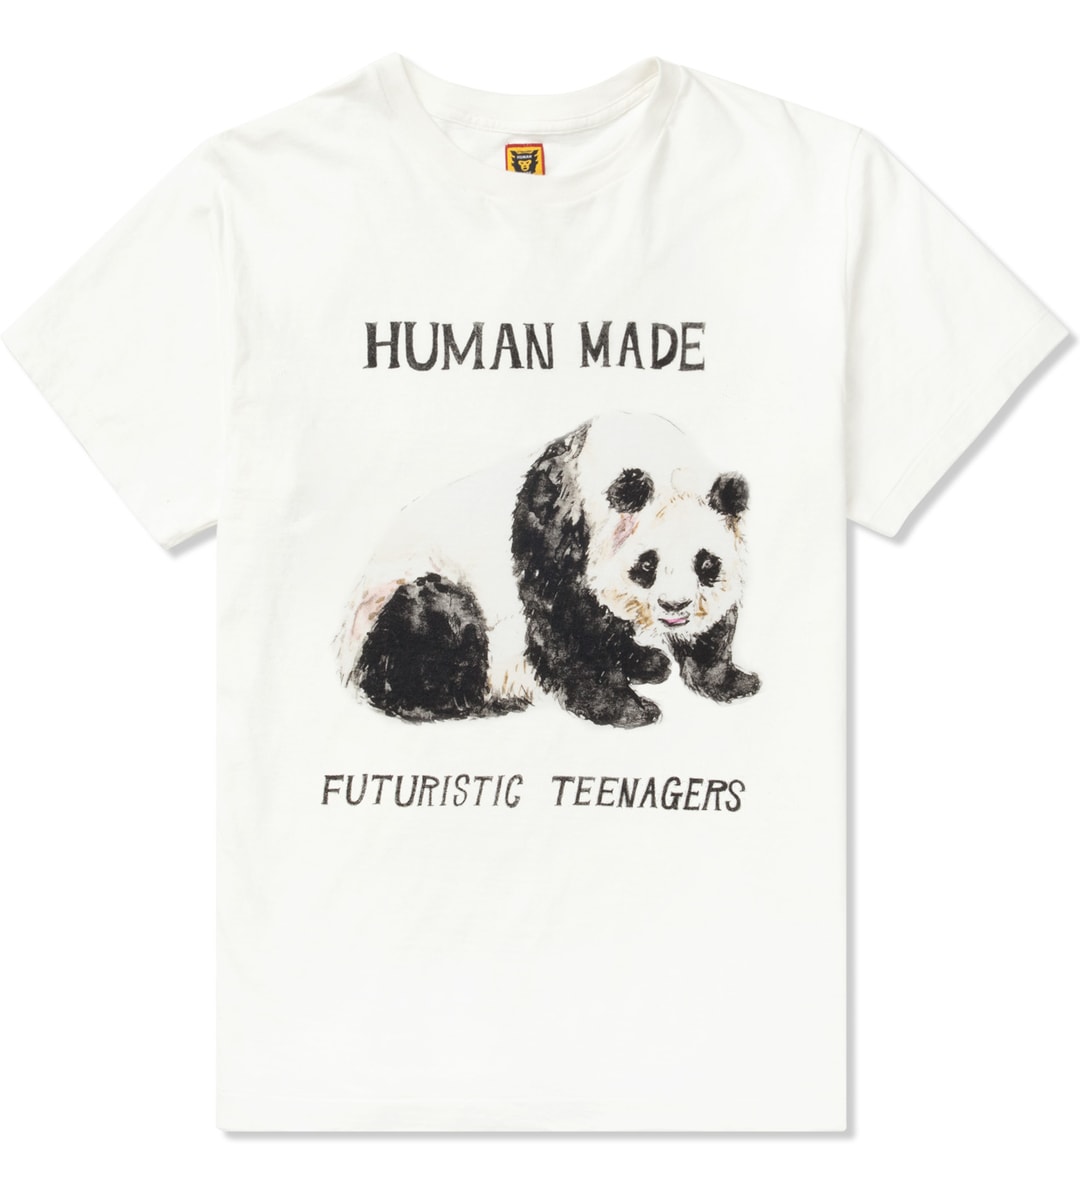 Human Made - Human Made x Beatles T-shirt  HBX - Globally Curated Fashion  and Lifestyle by Hypebeast